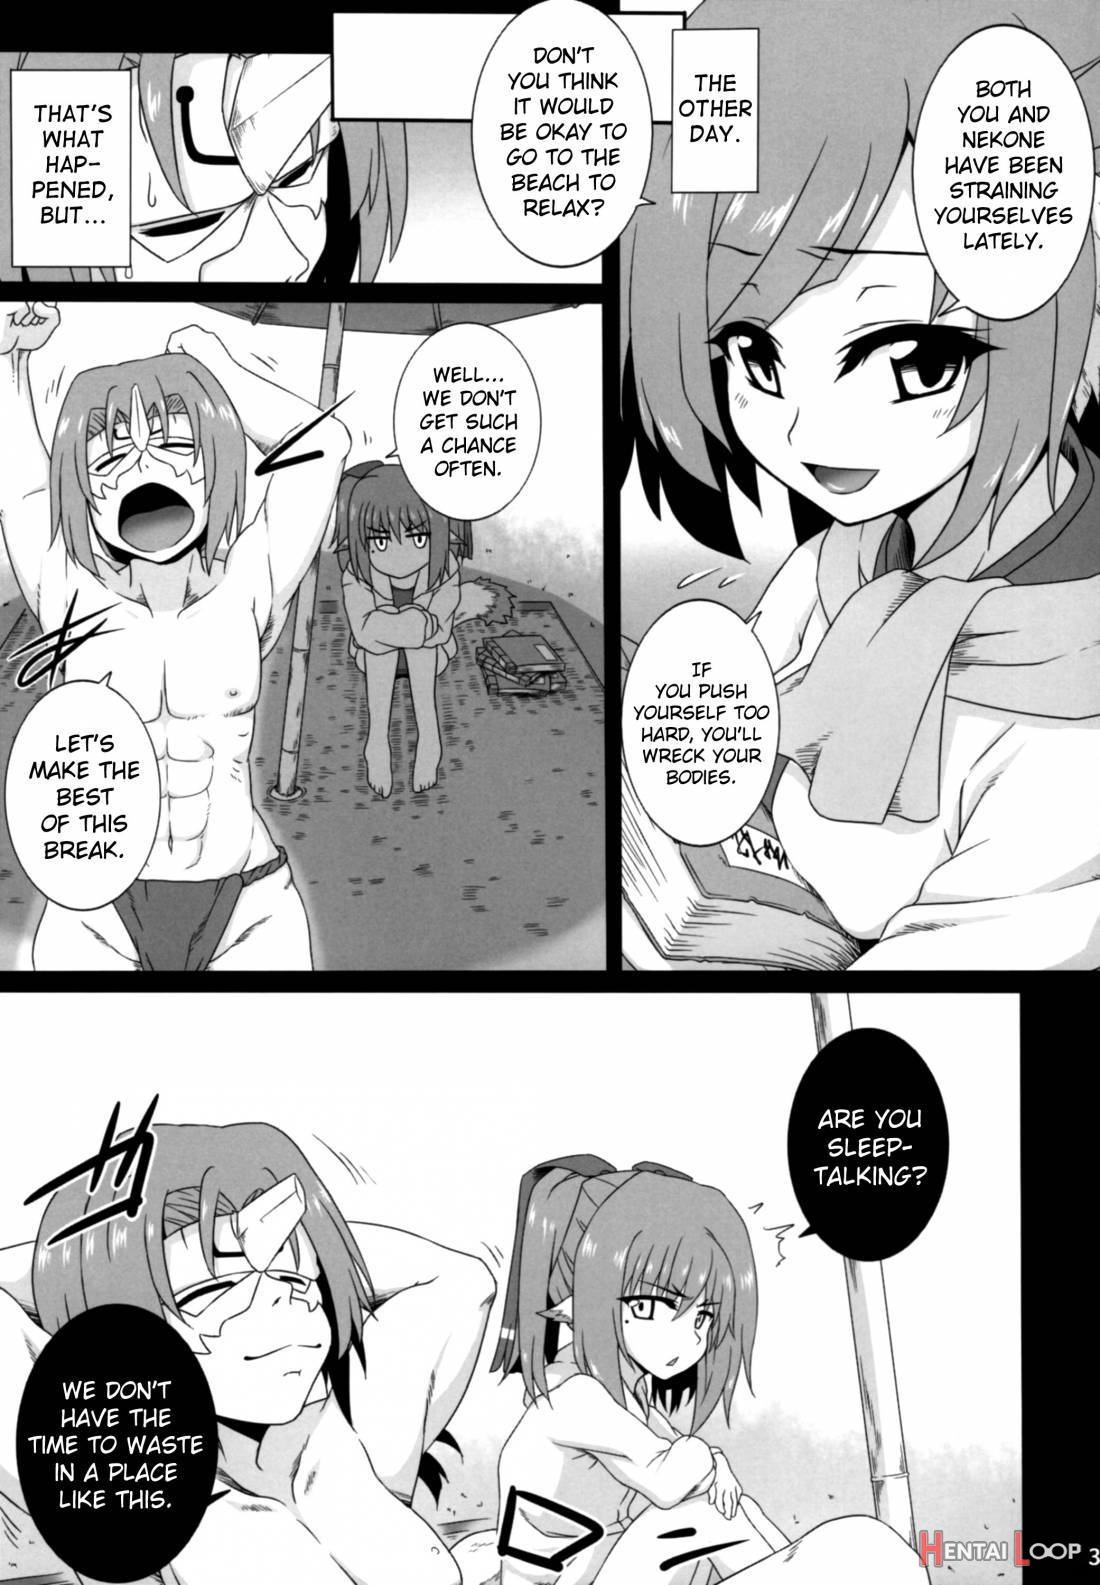 Nekone And The Everlasting Summer Vacation page 4